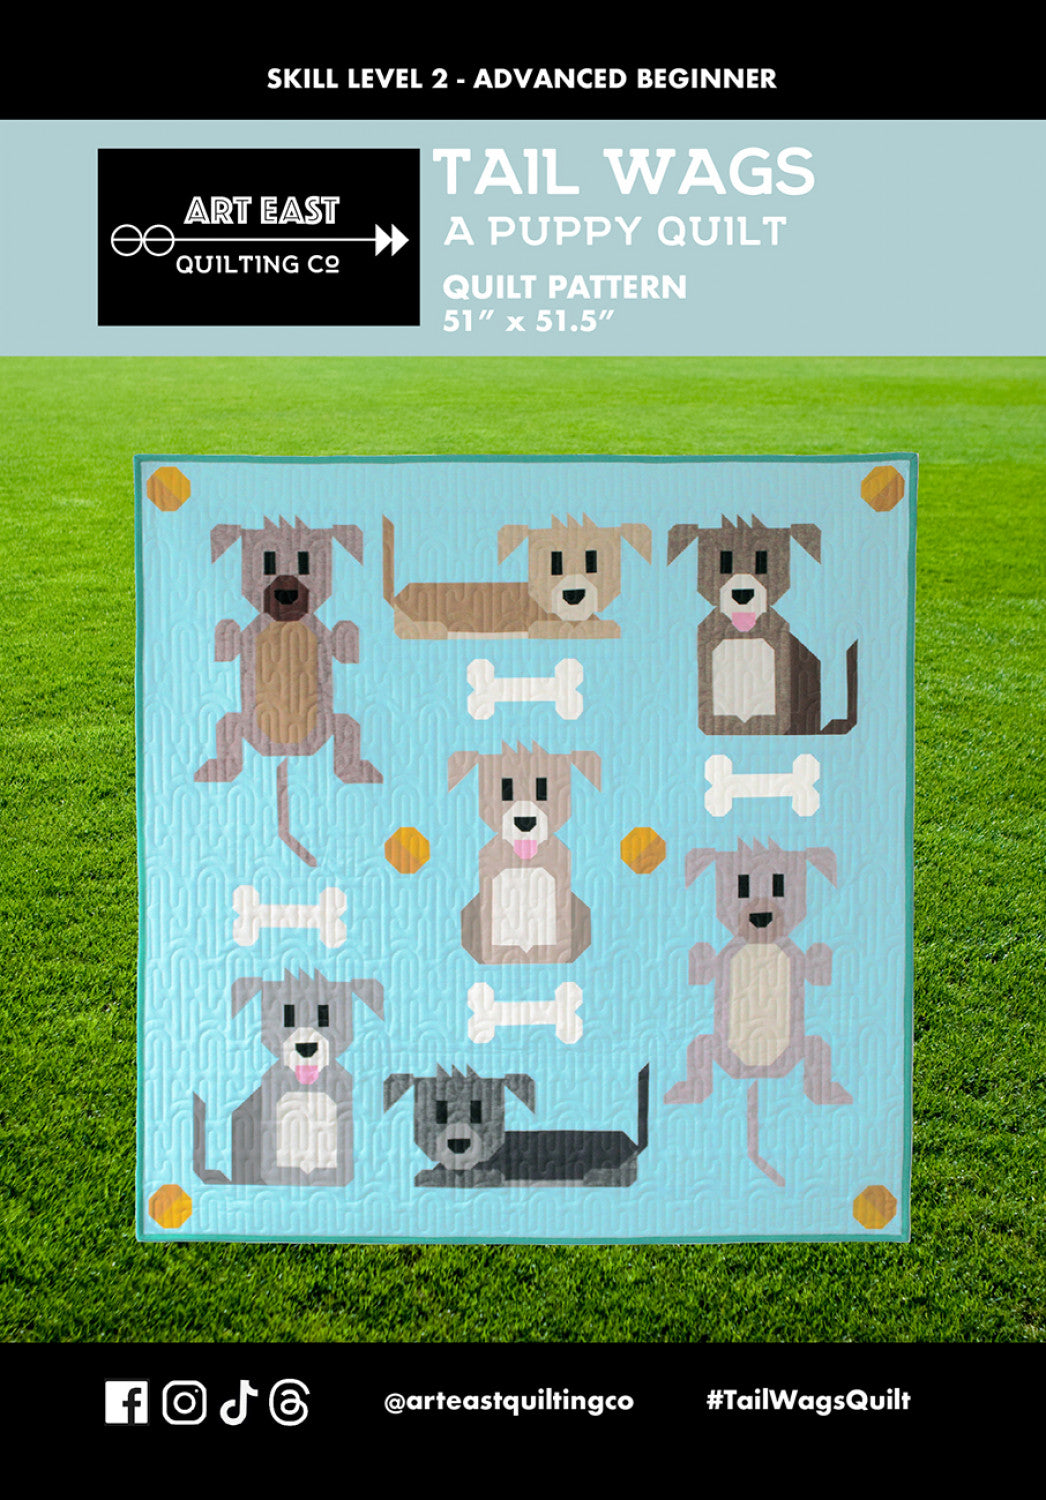 Tail Wags A Puppy Quilt Pattern by Art East Quilting Co.